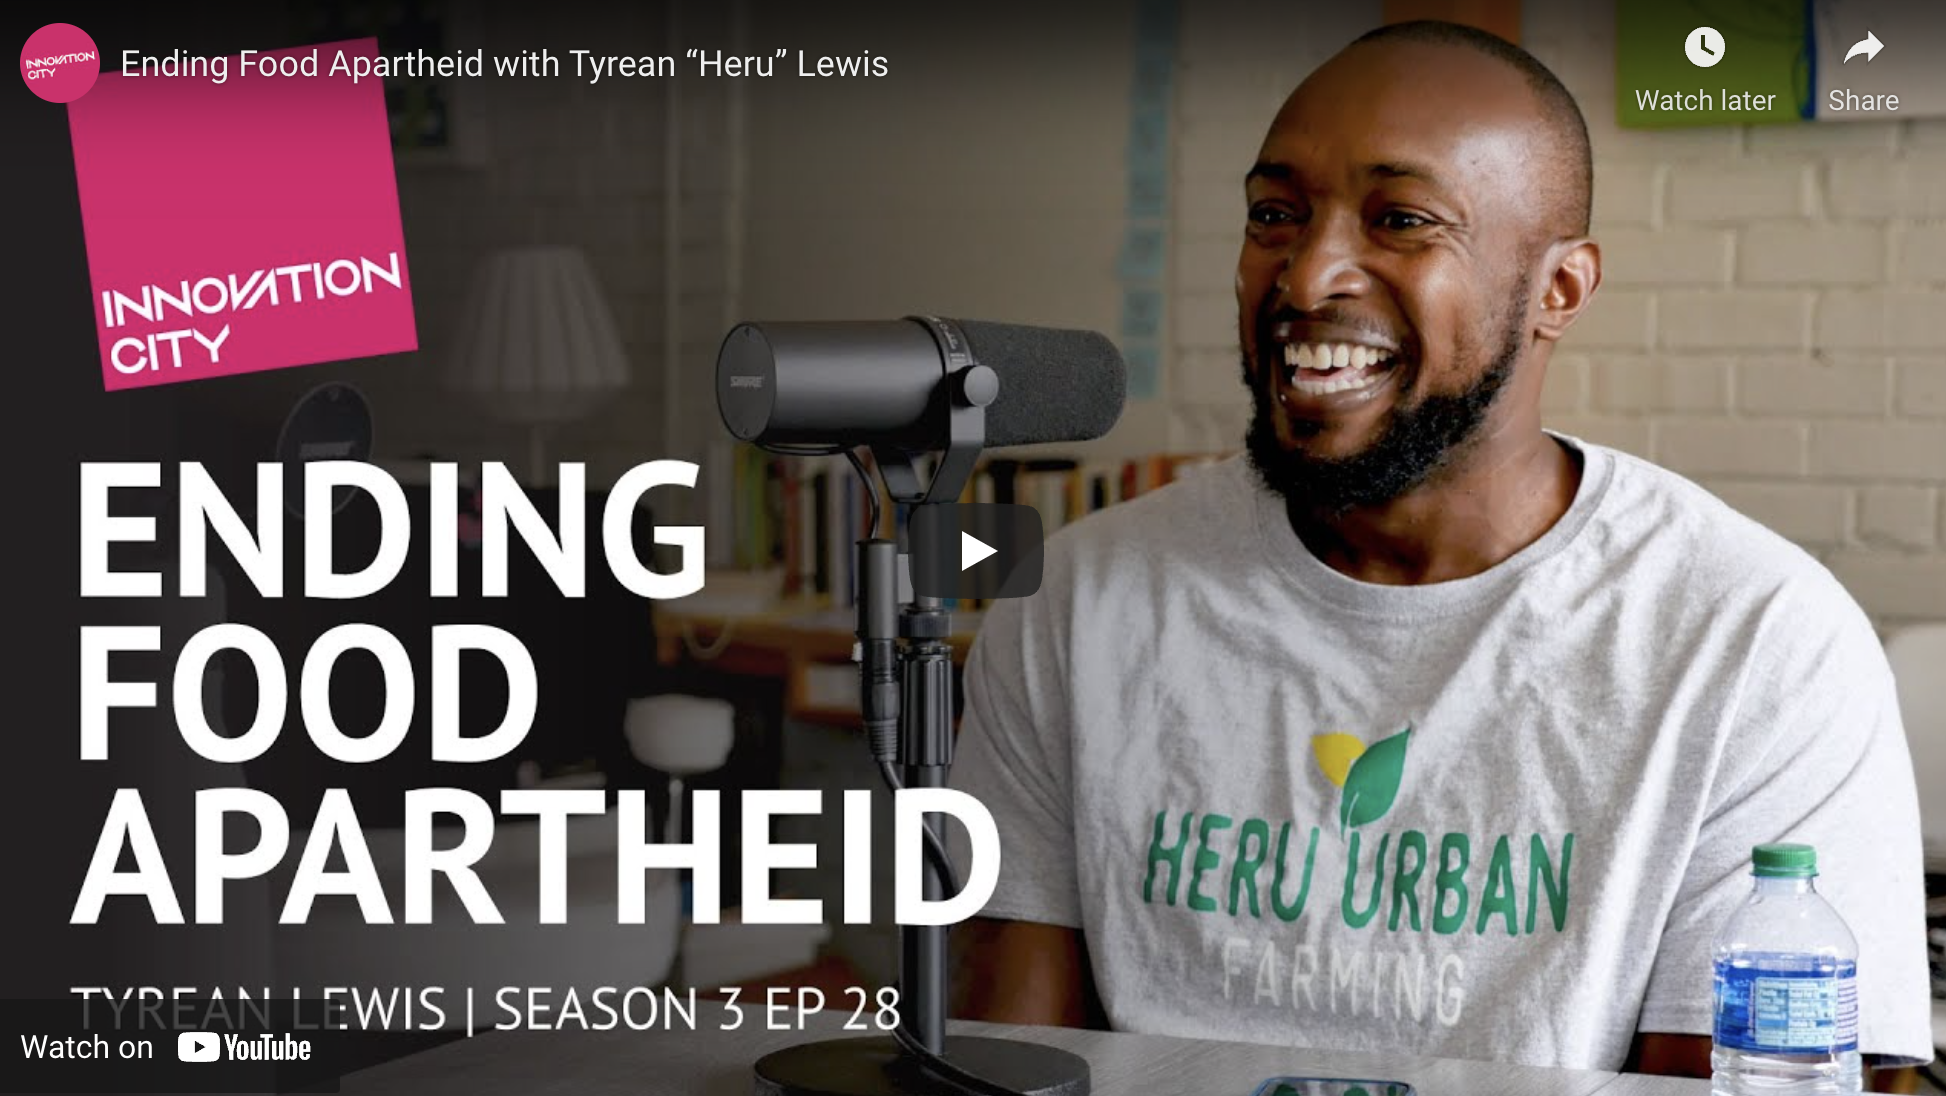 Innovation City Podcast Feature: Ep. 163: Tyrean Lewis (Heru Urban Farming) discusses his family tradition of farming, ending food apartheid in St. Louis and beyond